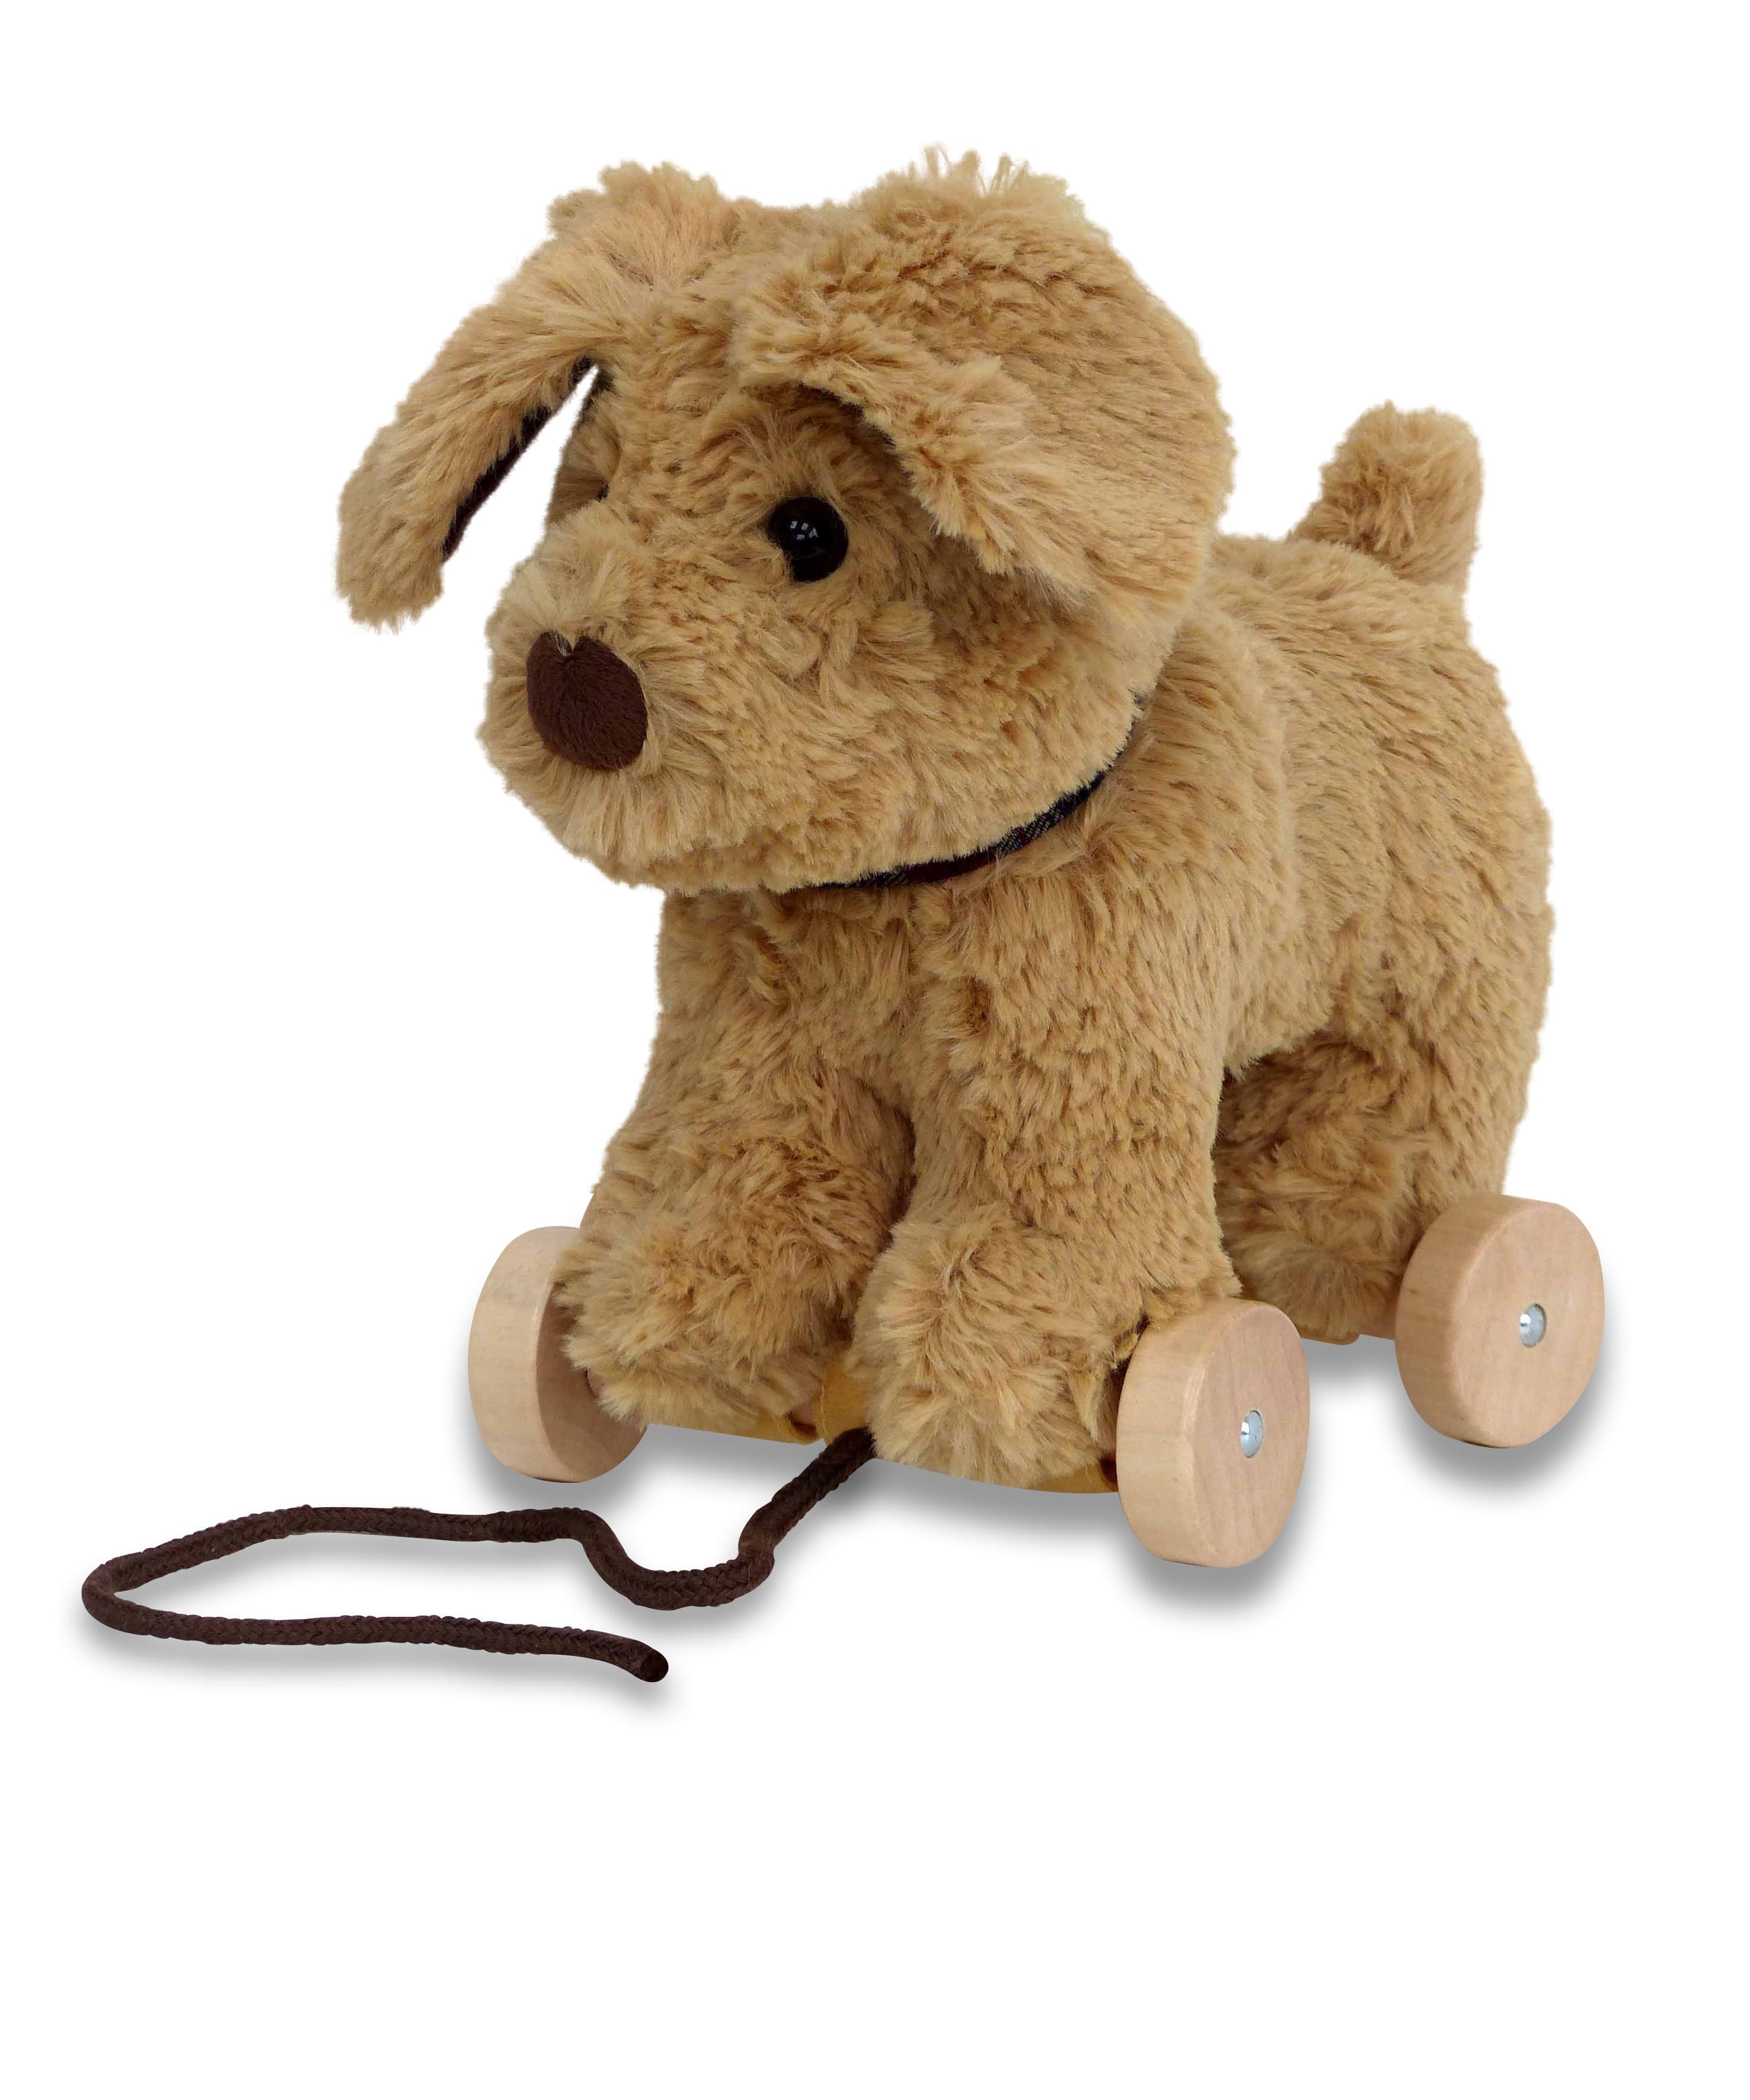 Little Bird Told Me Dexter Dog Pull Along Toy - For Your Little One